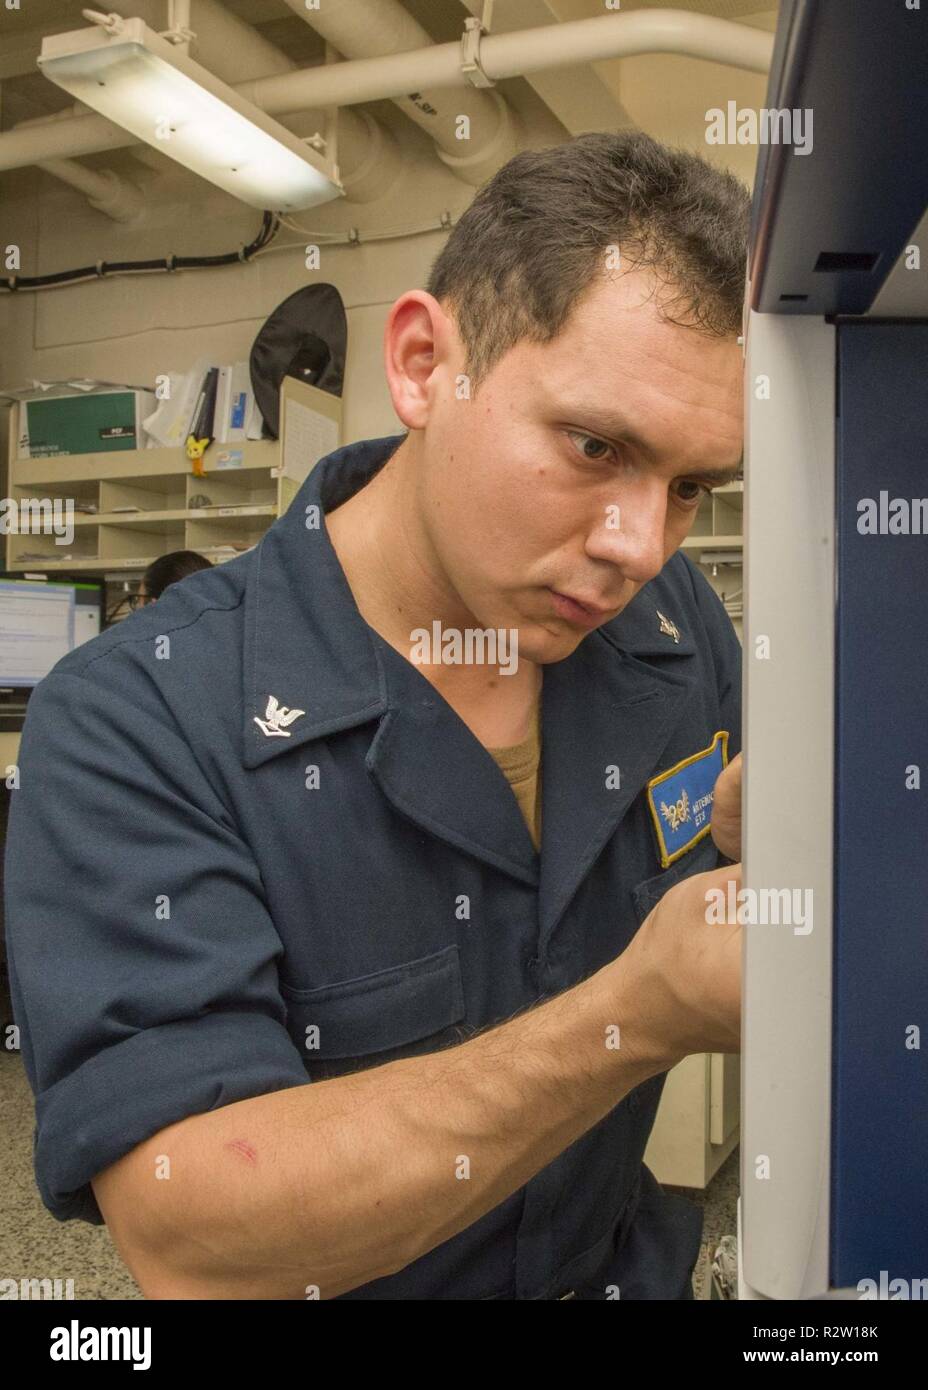 MEDITERRANEAN SEA (Nov. 6, 2018) Electronics Technician 3rd Class Artemio Gomez conducts maintenance on a printer aboard the San Antonio-class amphibious transport dock ship USS Anchorage (LPD 23) in the Mediterranean Sea, Nov. 6, 2018. Anchorage and embarked 13th Marine Expeditionary Unit are deployed to the U.S. 6th Fleet area of operations as a crisis response force in support of regional partners as well as to promote U.S. national security interests in Europe and Africa. Stock Photo